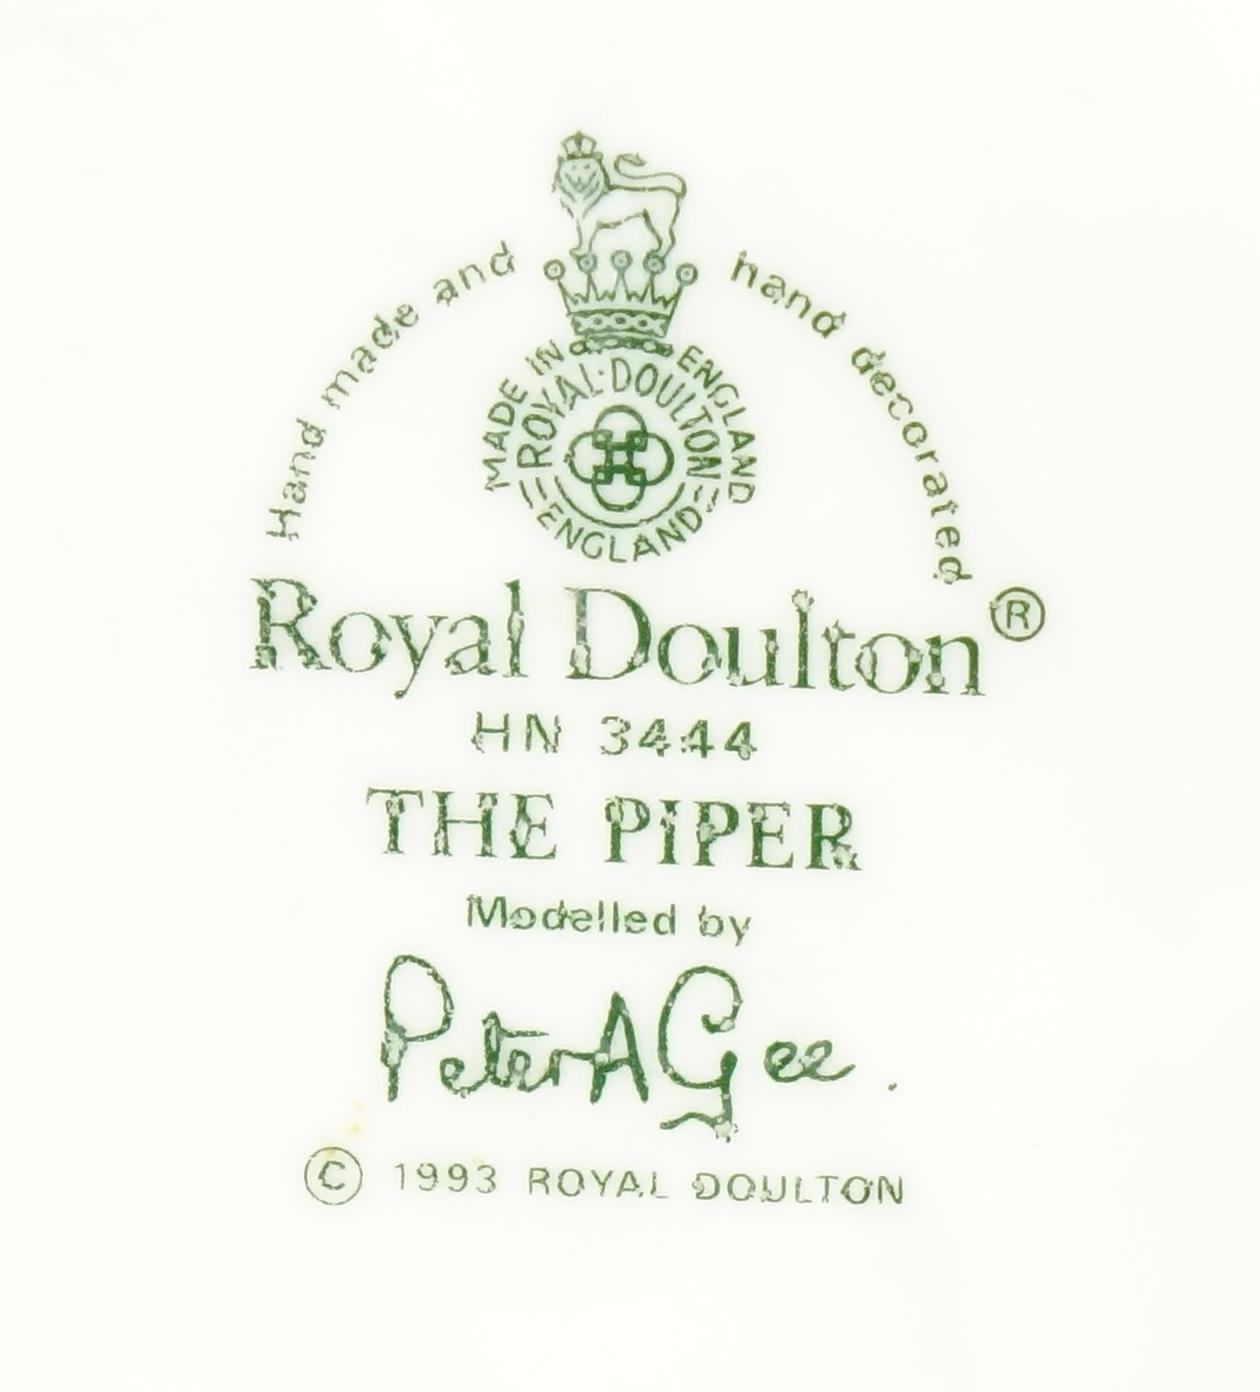 Three Royal Doulton figures, The Piper HN3444, The Lair HN2361 and Her Majesty Queen Elizabeth II - Image 6 of 6